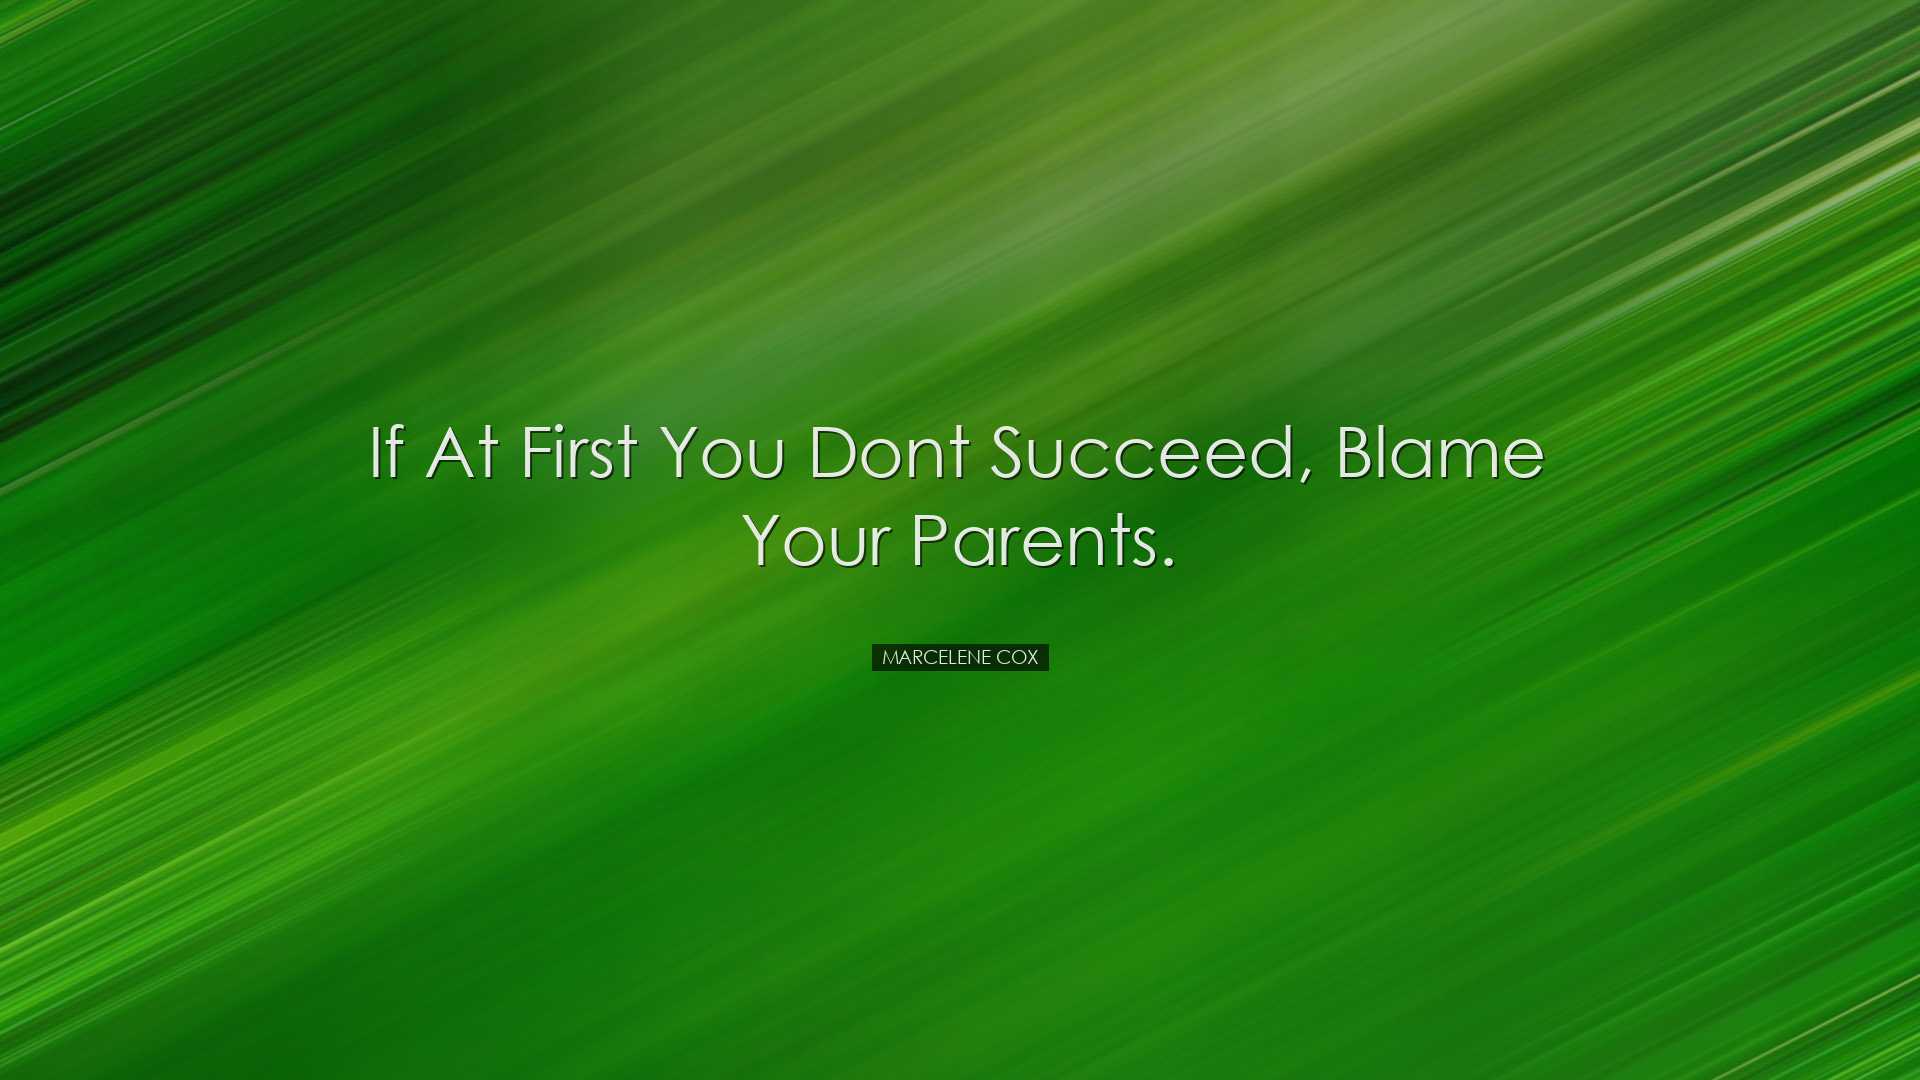 If at first you dont succeed, blame your parents. - Marcelene Cox